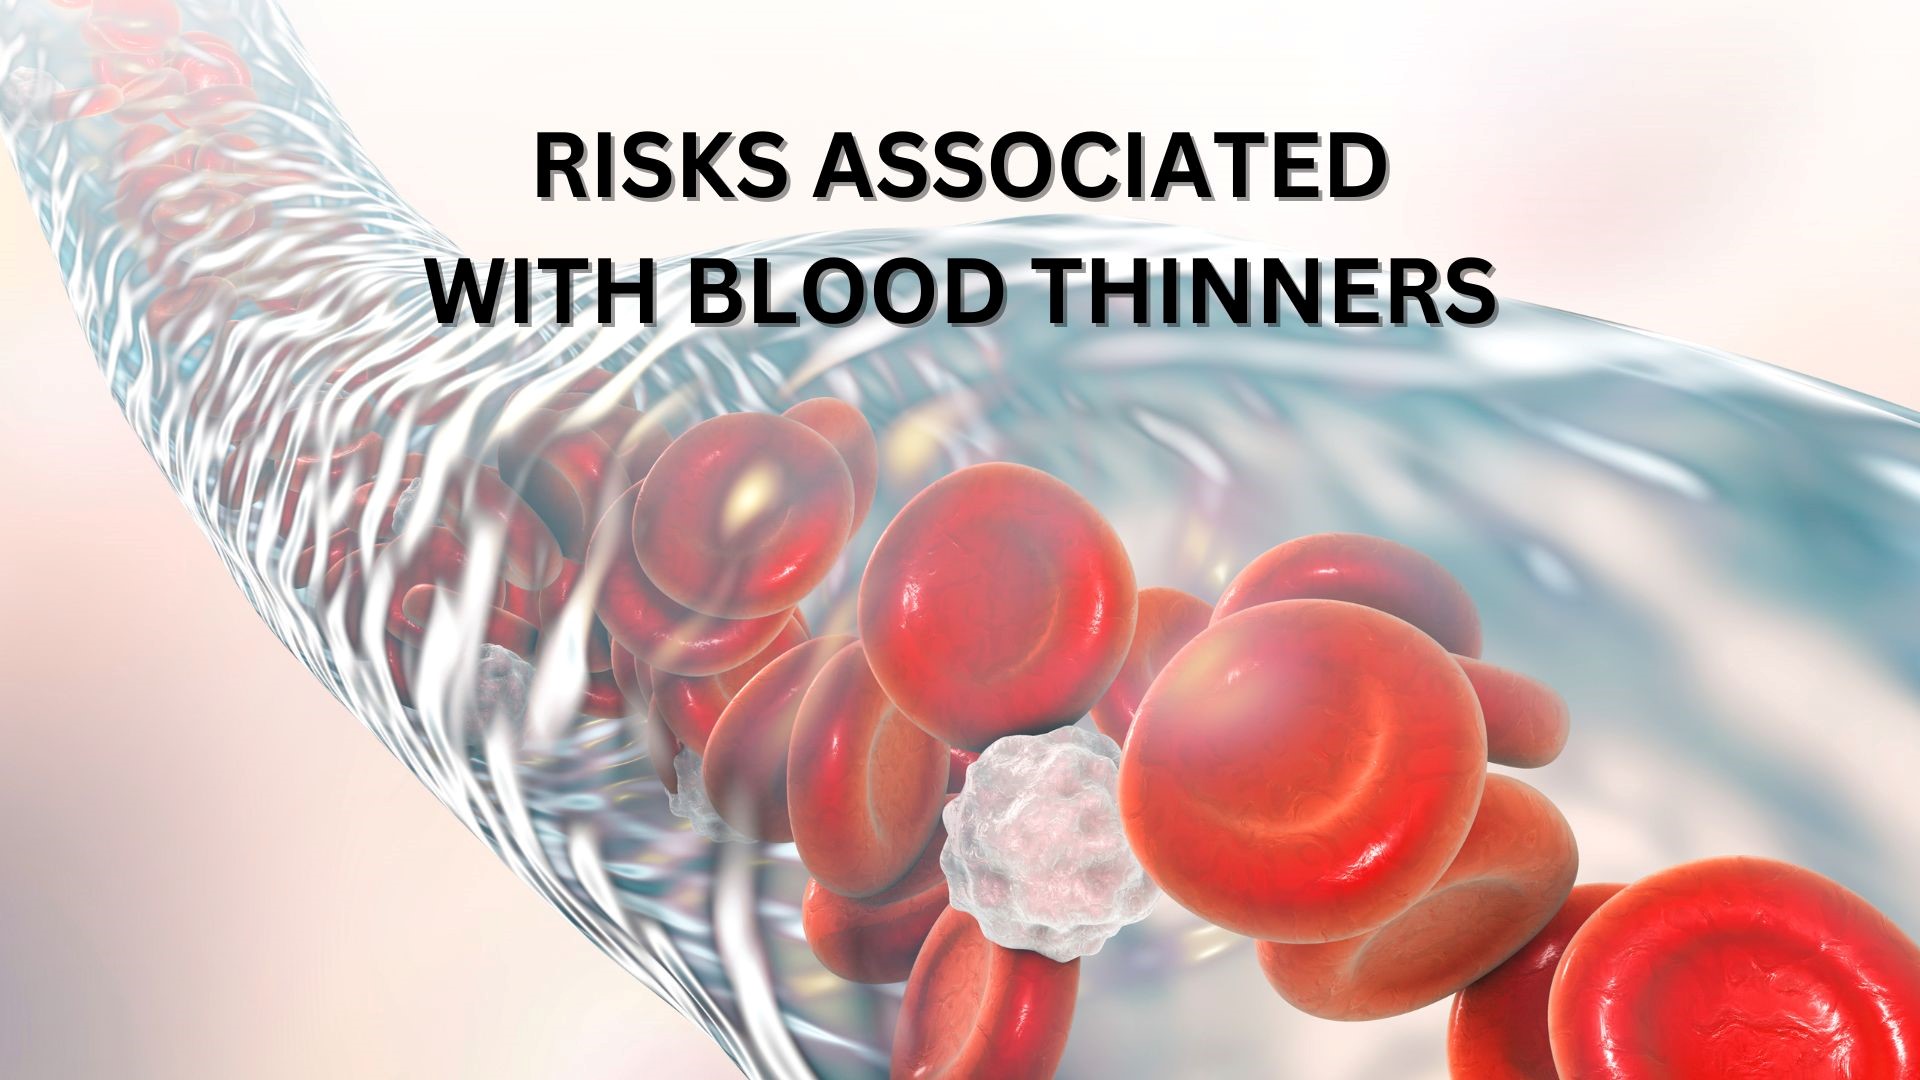 Risks Associated with Blood-Thinners